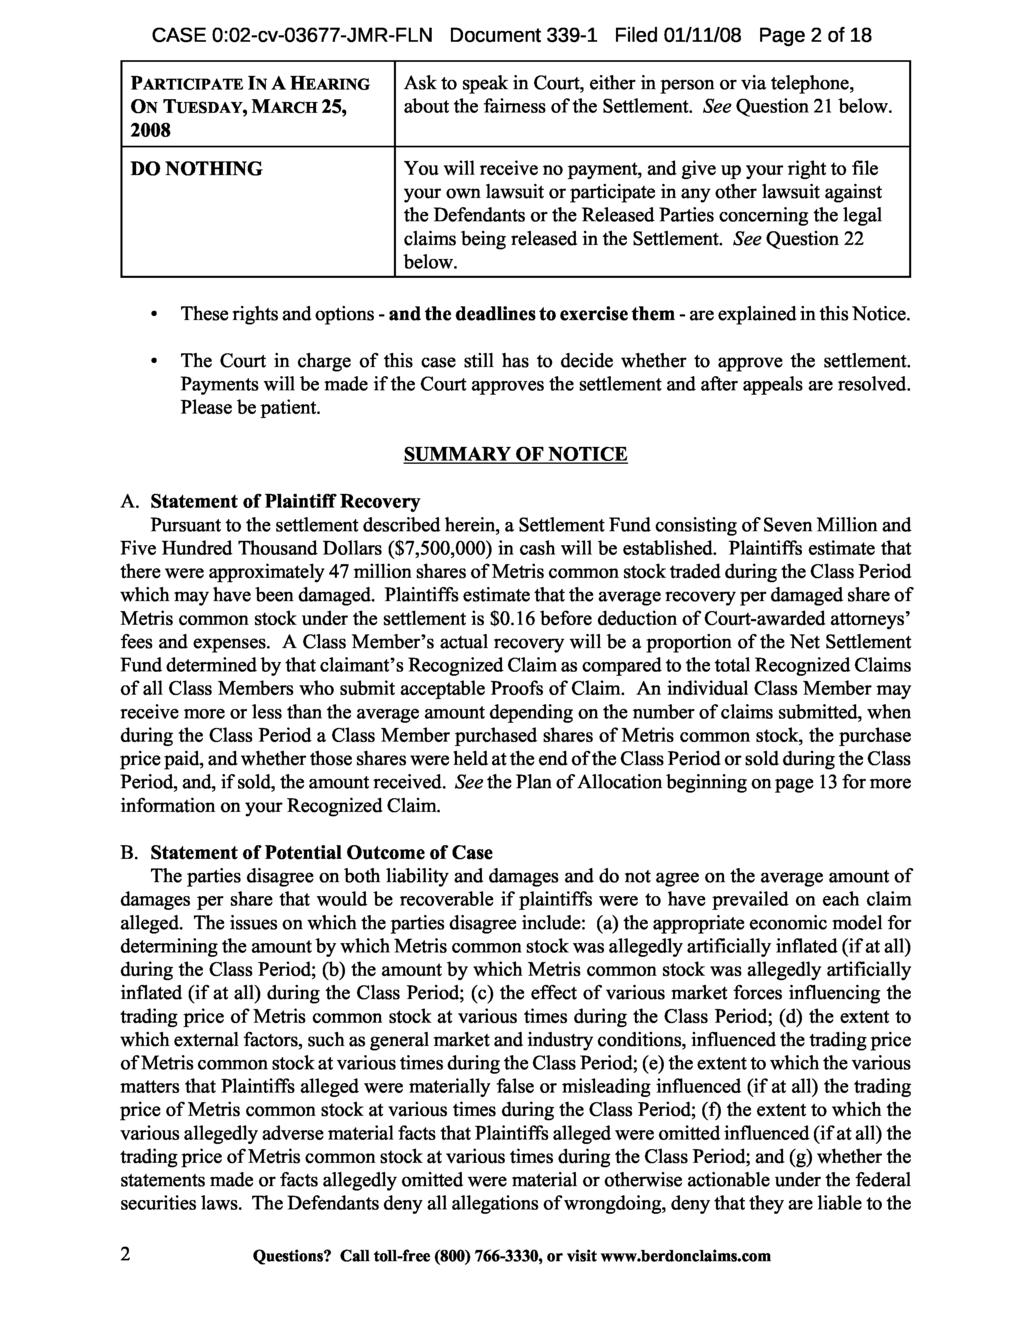 CASE 0:02-cv-03677-JMR-FLN Document 339-1 Filed 01/11/08 Page 2 of 18 PARTICIPATE IN A HEARING Ask to speak in Court, either in person or via telephone, ON TUESDAY, MARCH 25, about the fairness of